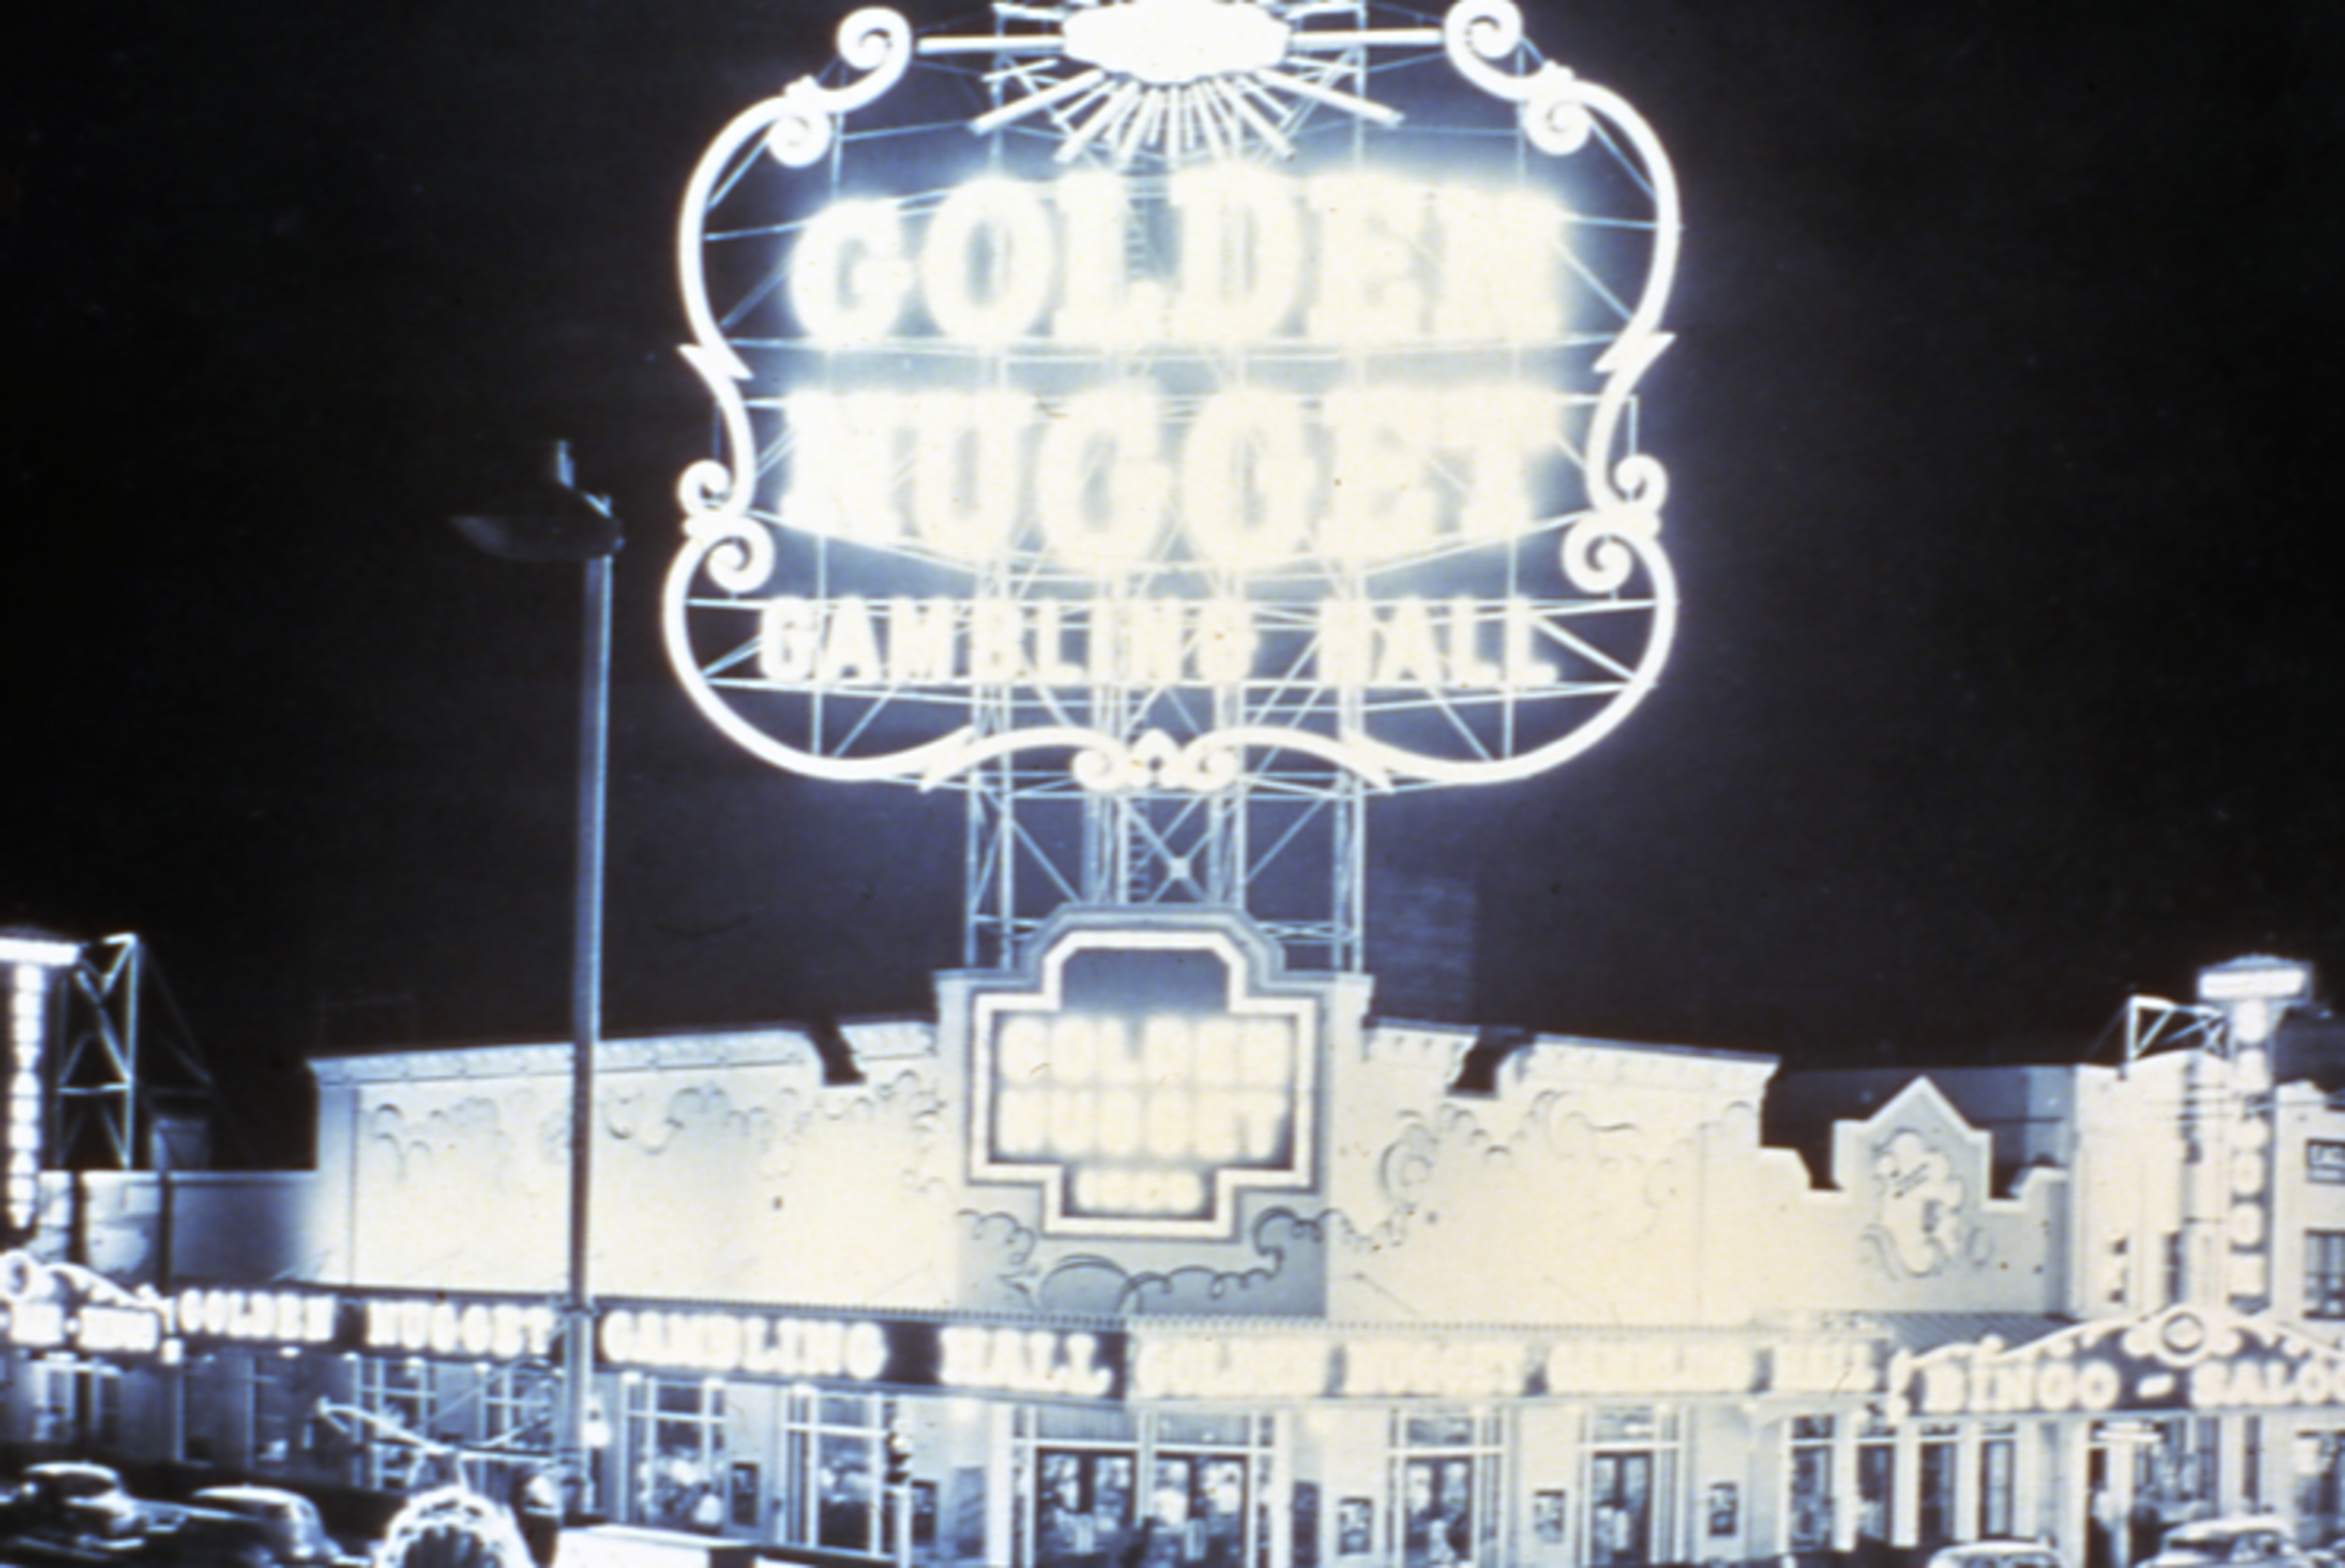 Slide of the Golden Nugget neon sign, Las Vegas, circa late 1940s